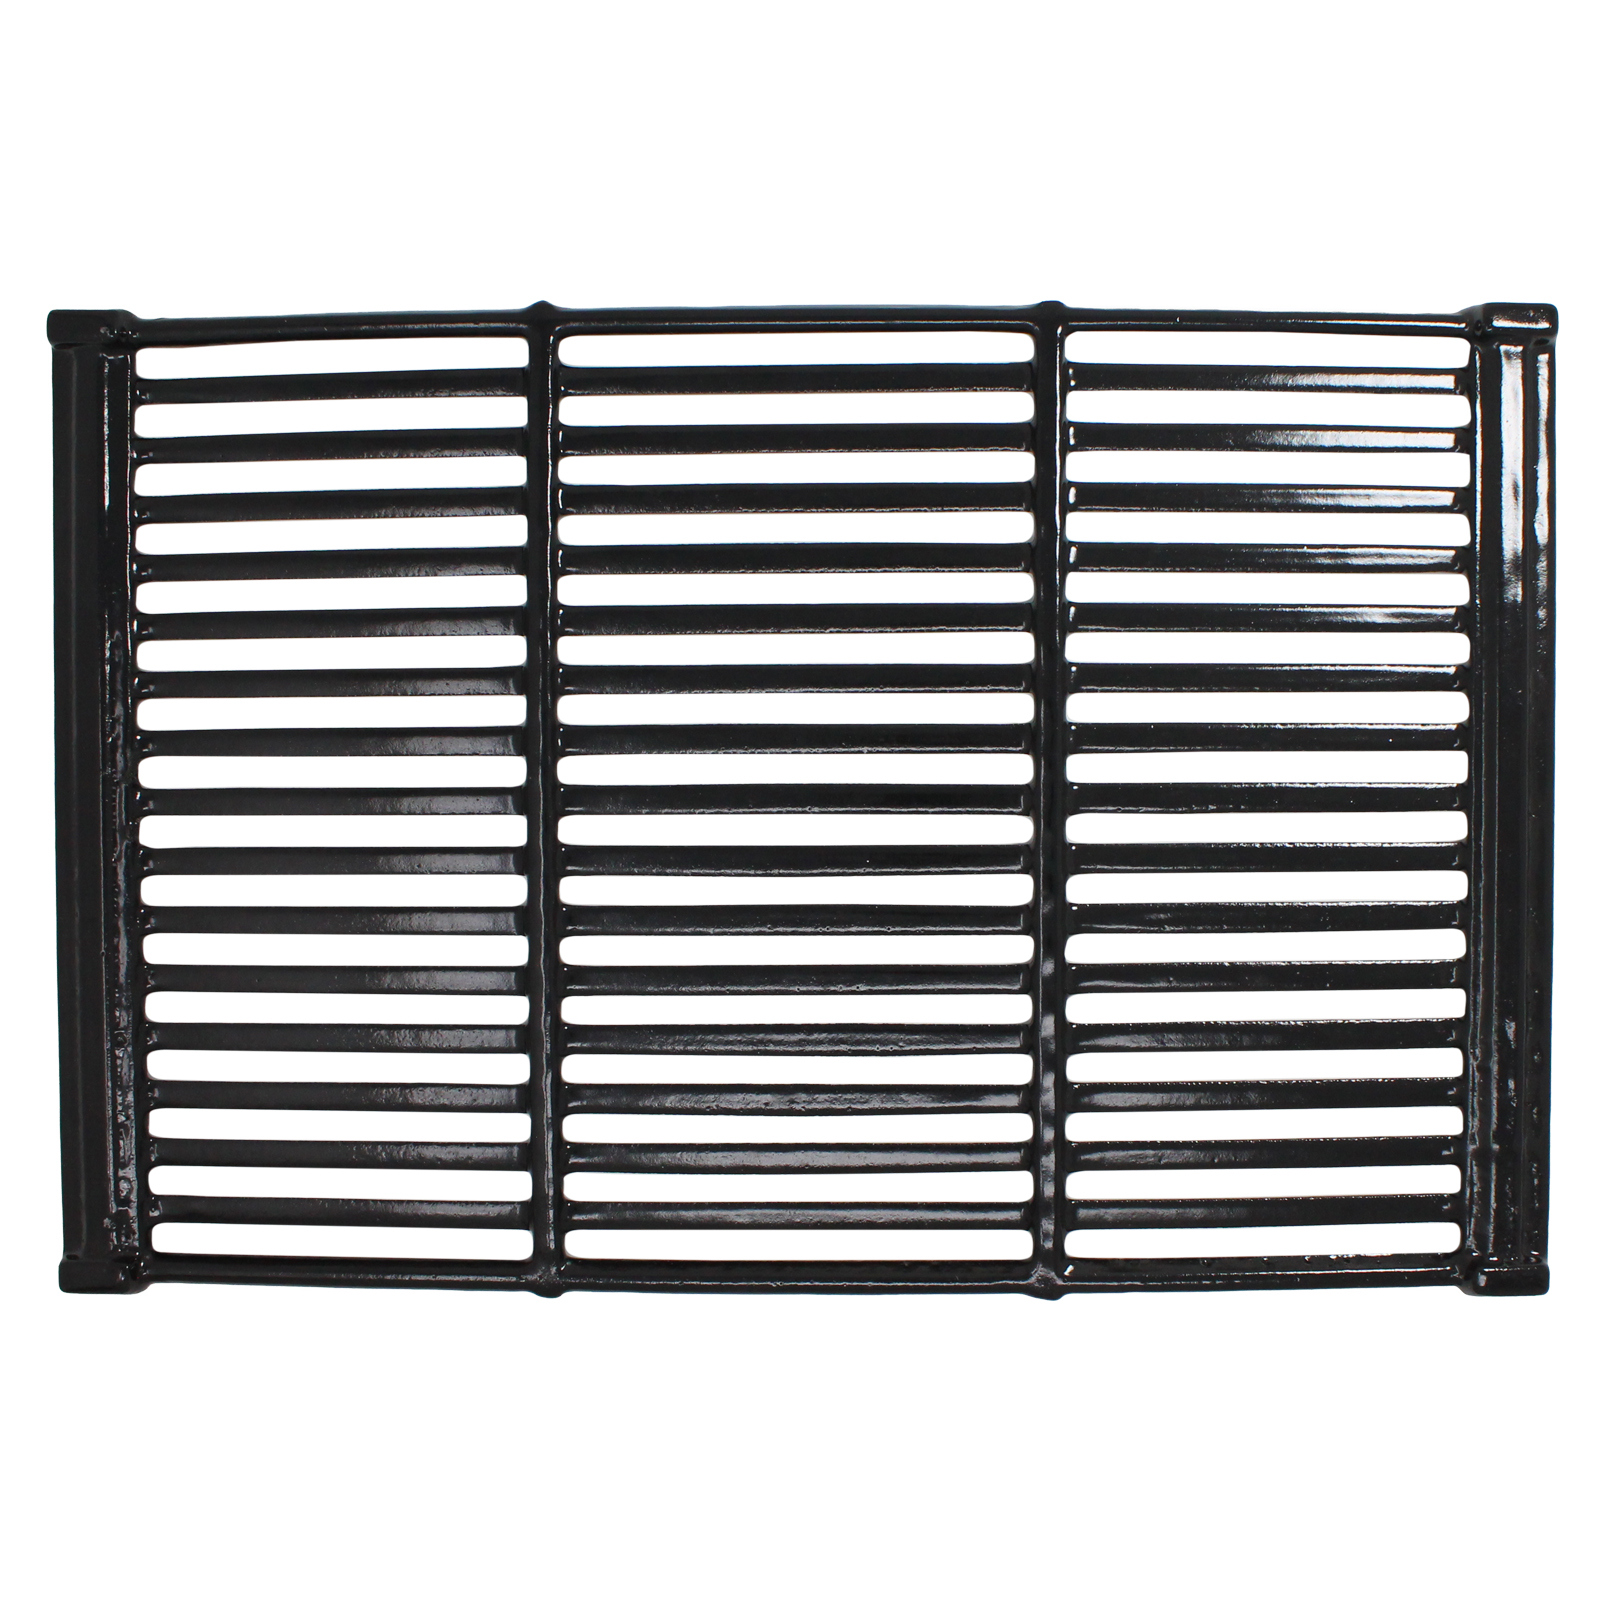 2-Pack BBQ Grill Cooking Grates Replacement Parts for Brinkmann 2400 - Compatible Barbeque Porcelain Enameled Cast Iron Grid 19" - image 2 of 4